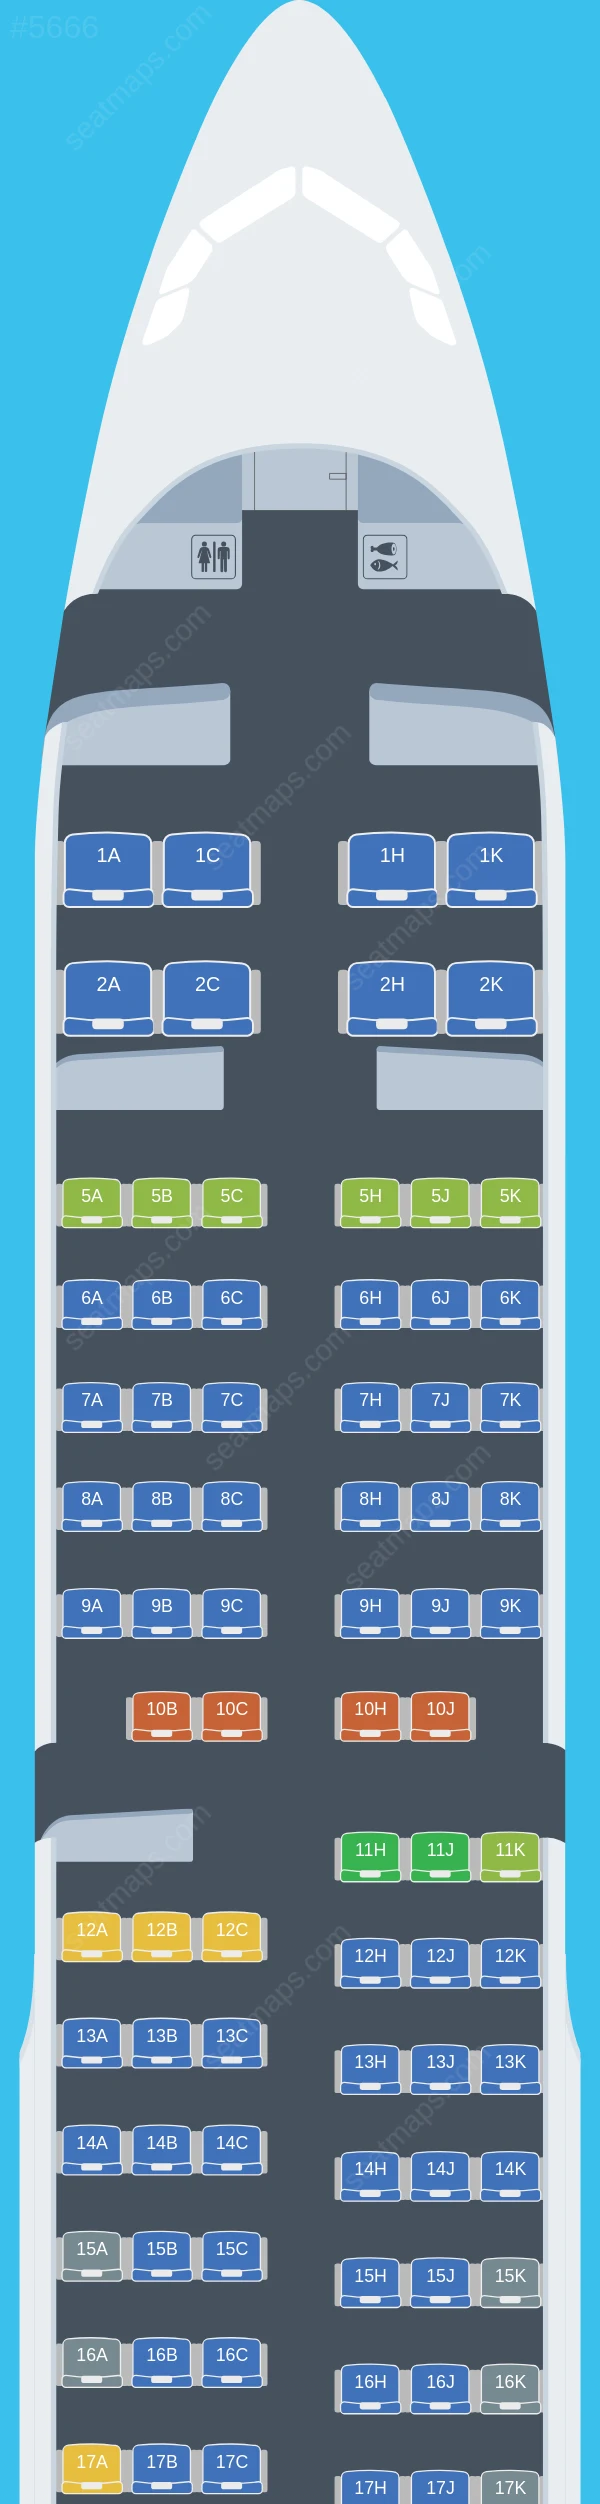 ANA - All Nippon Airways Airbus A321-200 seatmap preview